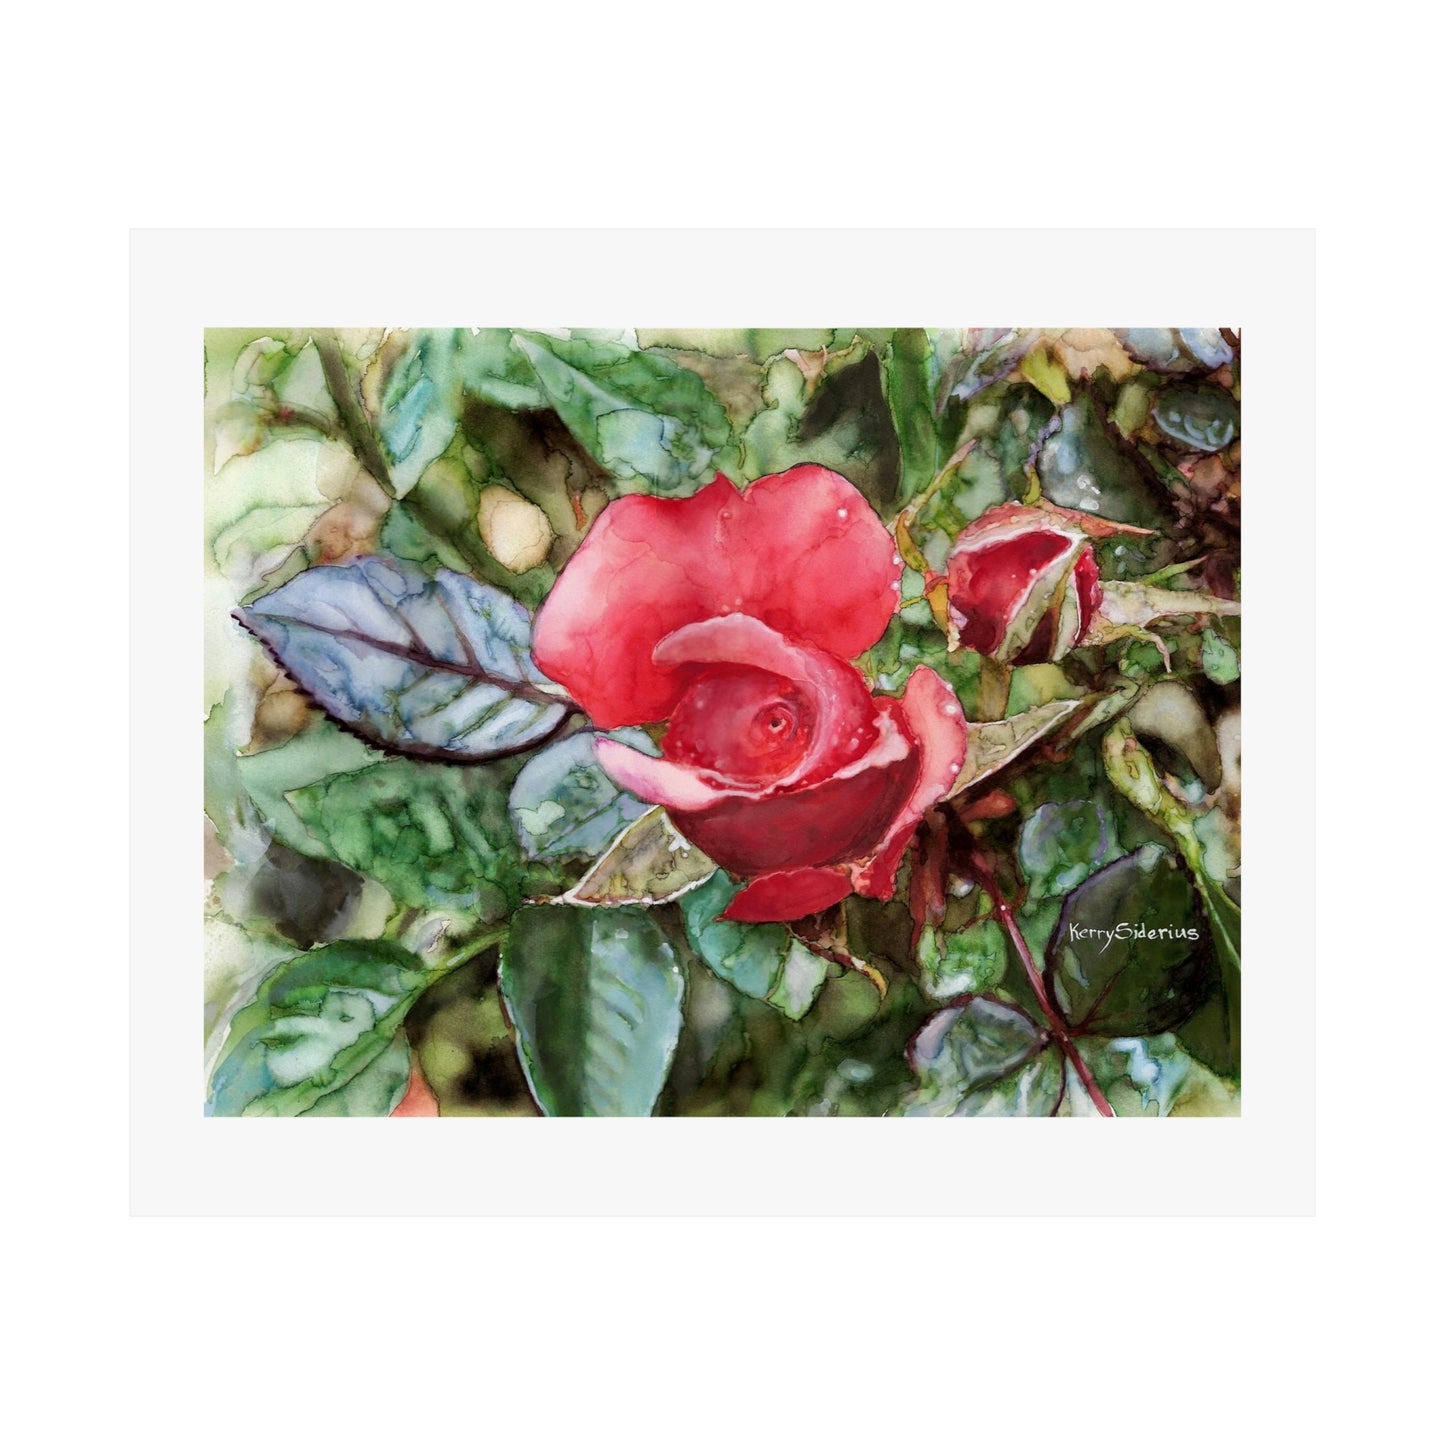 "Raindrops on Roses With Blue Leaf" Archival Print